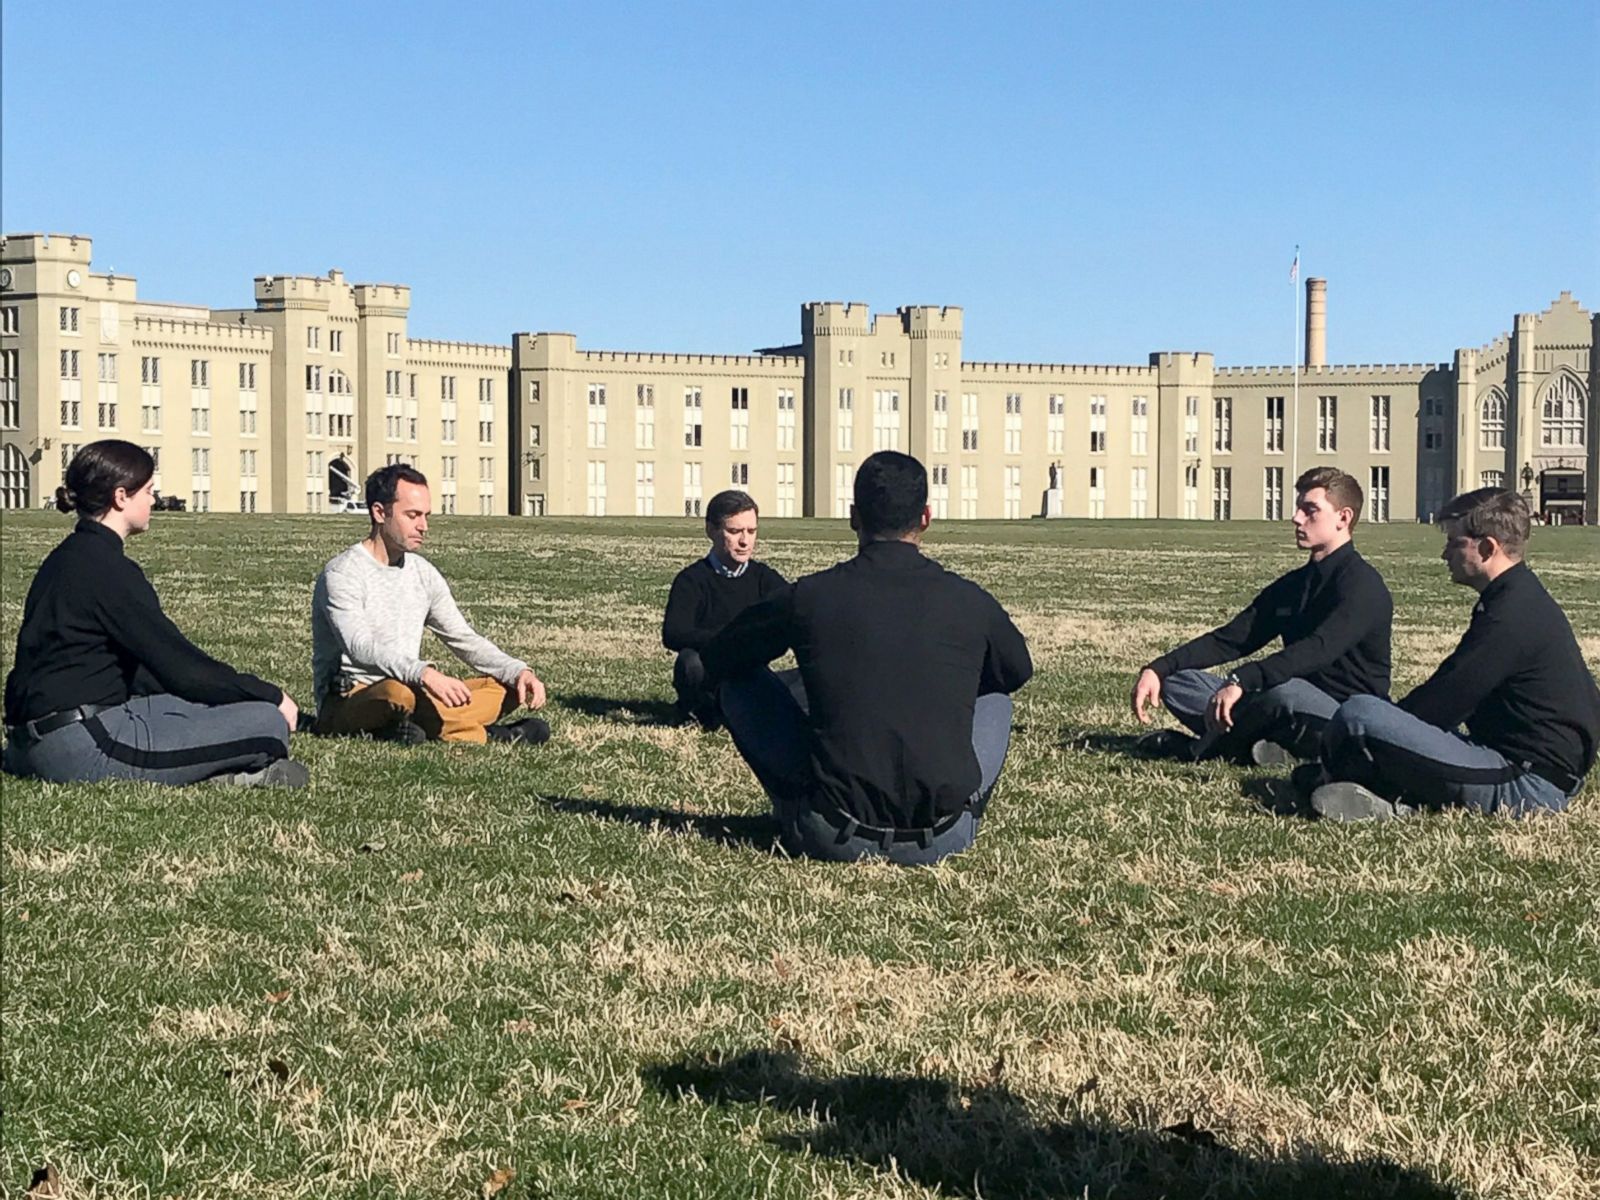 Military college professors teach cadets meditation to help them be effective warriors